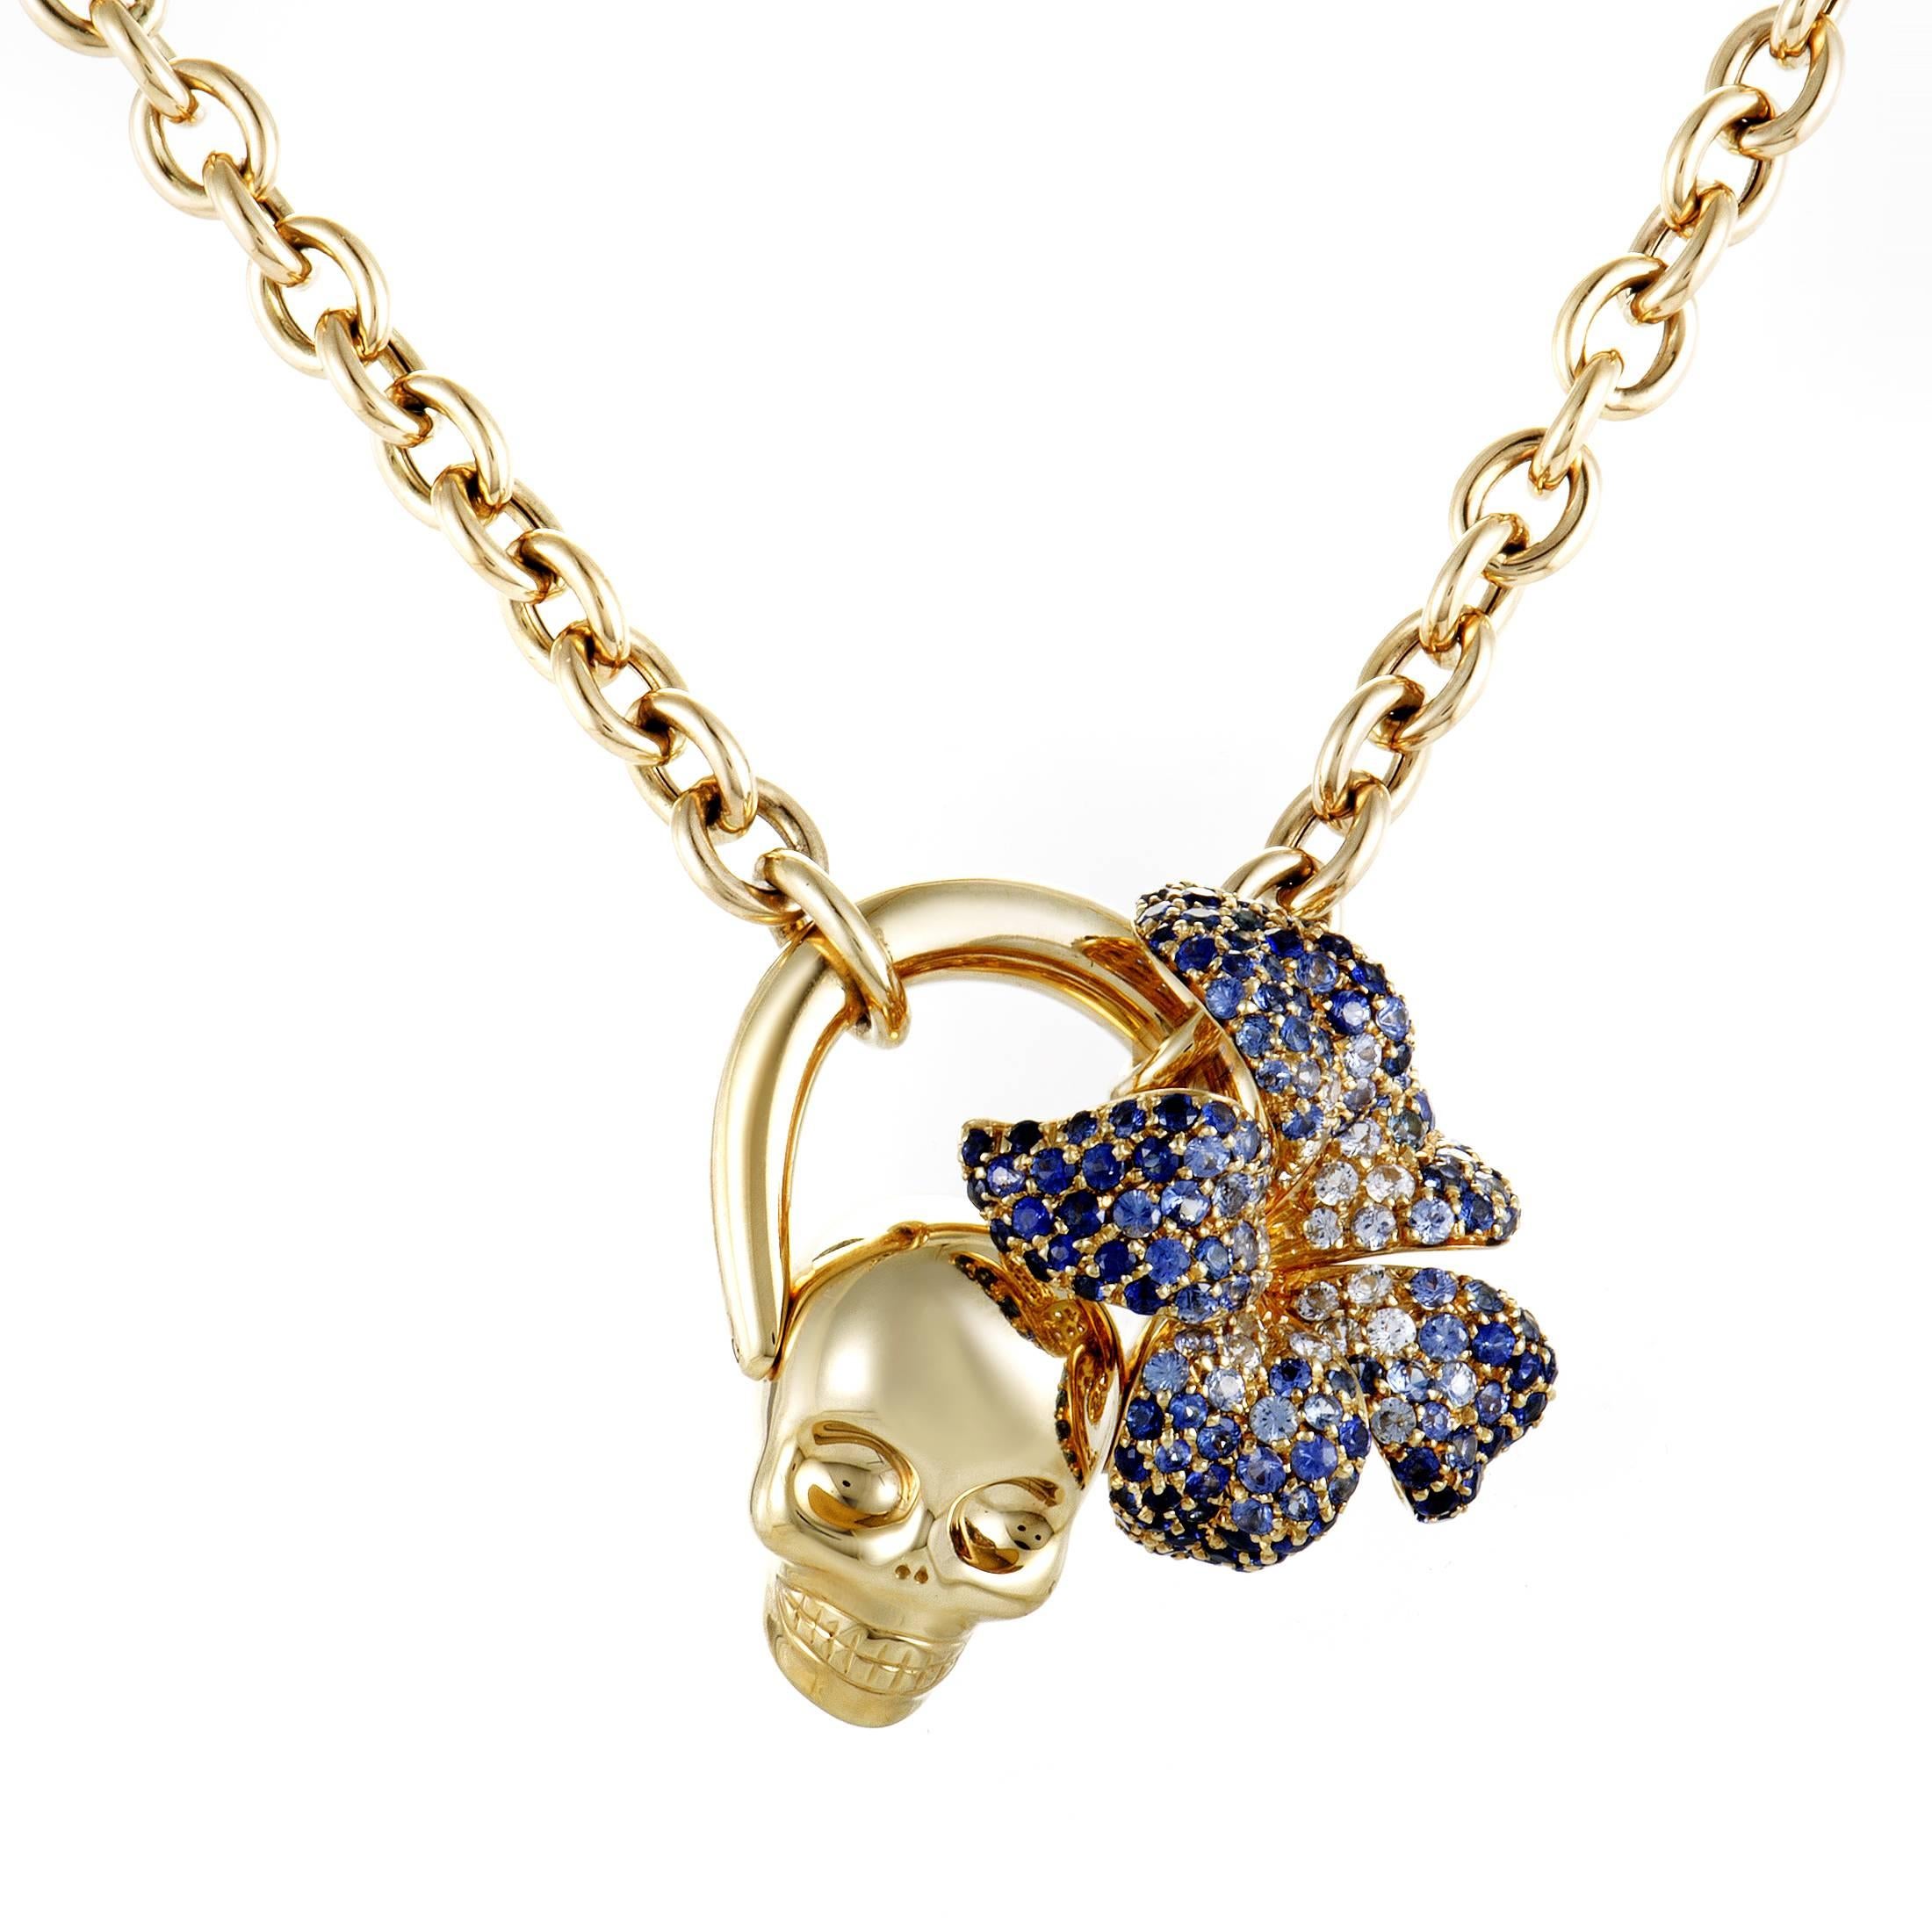 Gucci Flora Sapphire Pave Yellow Gold Skull Pendant Necklace